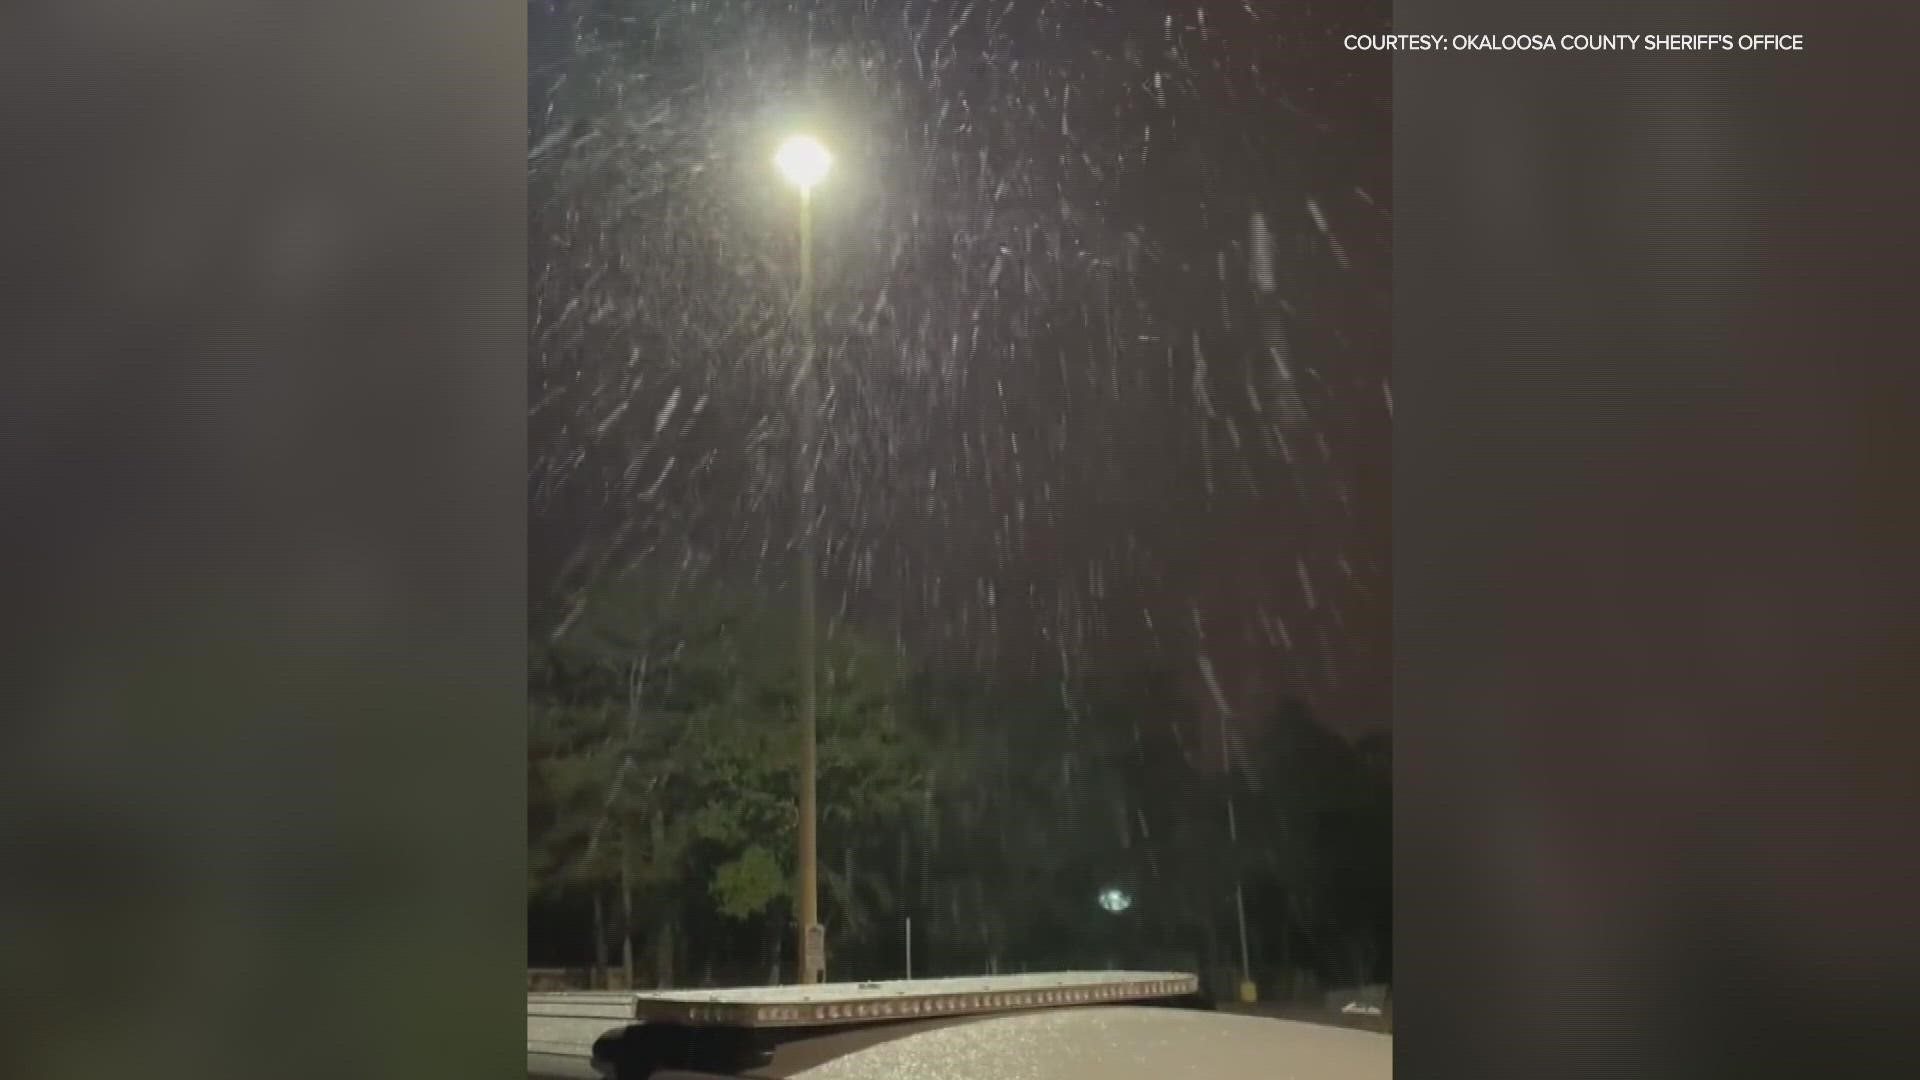 Snow flurries were seen cascading from the sky in a video shared Monday by the Okaloosa County Sheriff's Office.